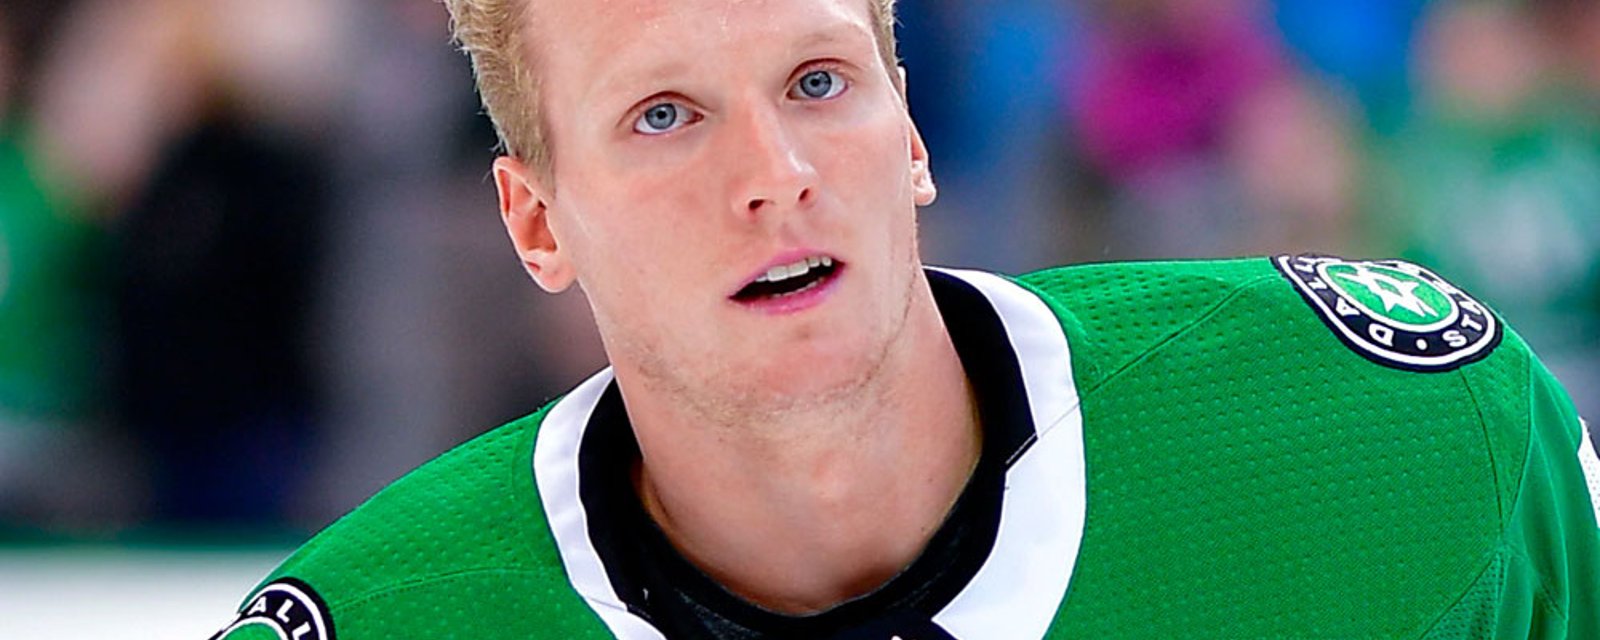 Stars’ Klingberg excused from game minutes before puck drop 